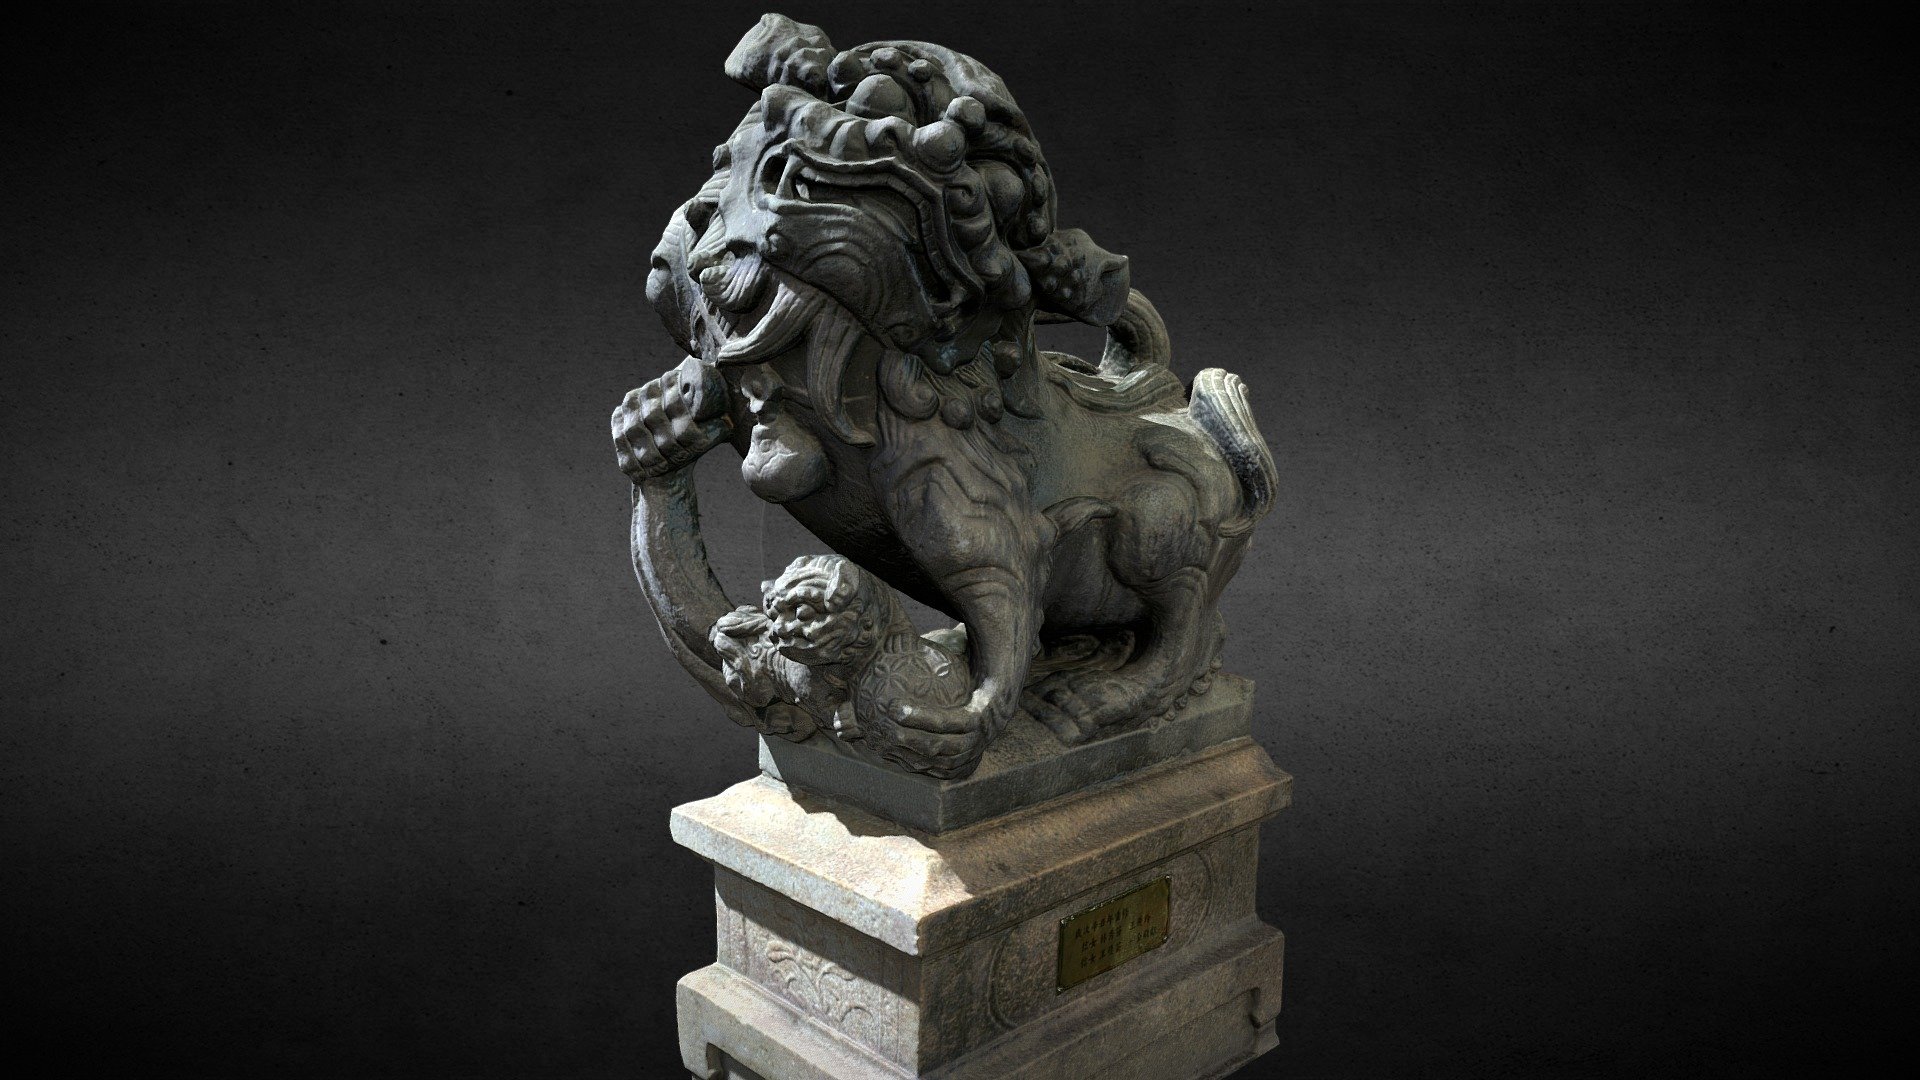 Lion-Statue-044F 旗津（旗後）天后宮 母獅

旗後天后宮傳創建於明鄭，經光緒十三年（1887）、昭和元年（1926）、民國三十七年等多次修建。
門前一對石獅，公開母闔嘴，肩頭、指爪等塊頭皆分明剛壯，並藉由扭擺的頭部與前足一高一低的架勢，乃至矮壯的身形，呈現出極具壓迫感的張力。

節自《臺灣石獅圖錄》陳磅礴著



Lion-statue-044F

Polys: 35980
Verts: 17980

Lion-statue-044F 3D Model. Model created with Photogrammetry and completed in 3ds Max.
Model used normal map for details. This model contains 35980 Triangles

Textures:

044F-AO.png—8192x8192(Ambient occlusion map)

044F-D.png—8192x8192(Diffuse map)

044F-N.png—8192x8192(Normals map)

044F-Metal—8192x8192(Metalness map)

044F-Rough.png—8192x8192(Roughness map) - Lion-Statue-044F 旗津天后宮 - Buy Royalty Free 3D model by Kevin Lai 賴昊君 (@HaoJunLai) 3d model